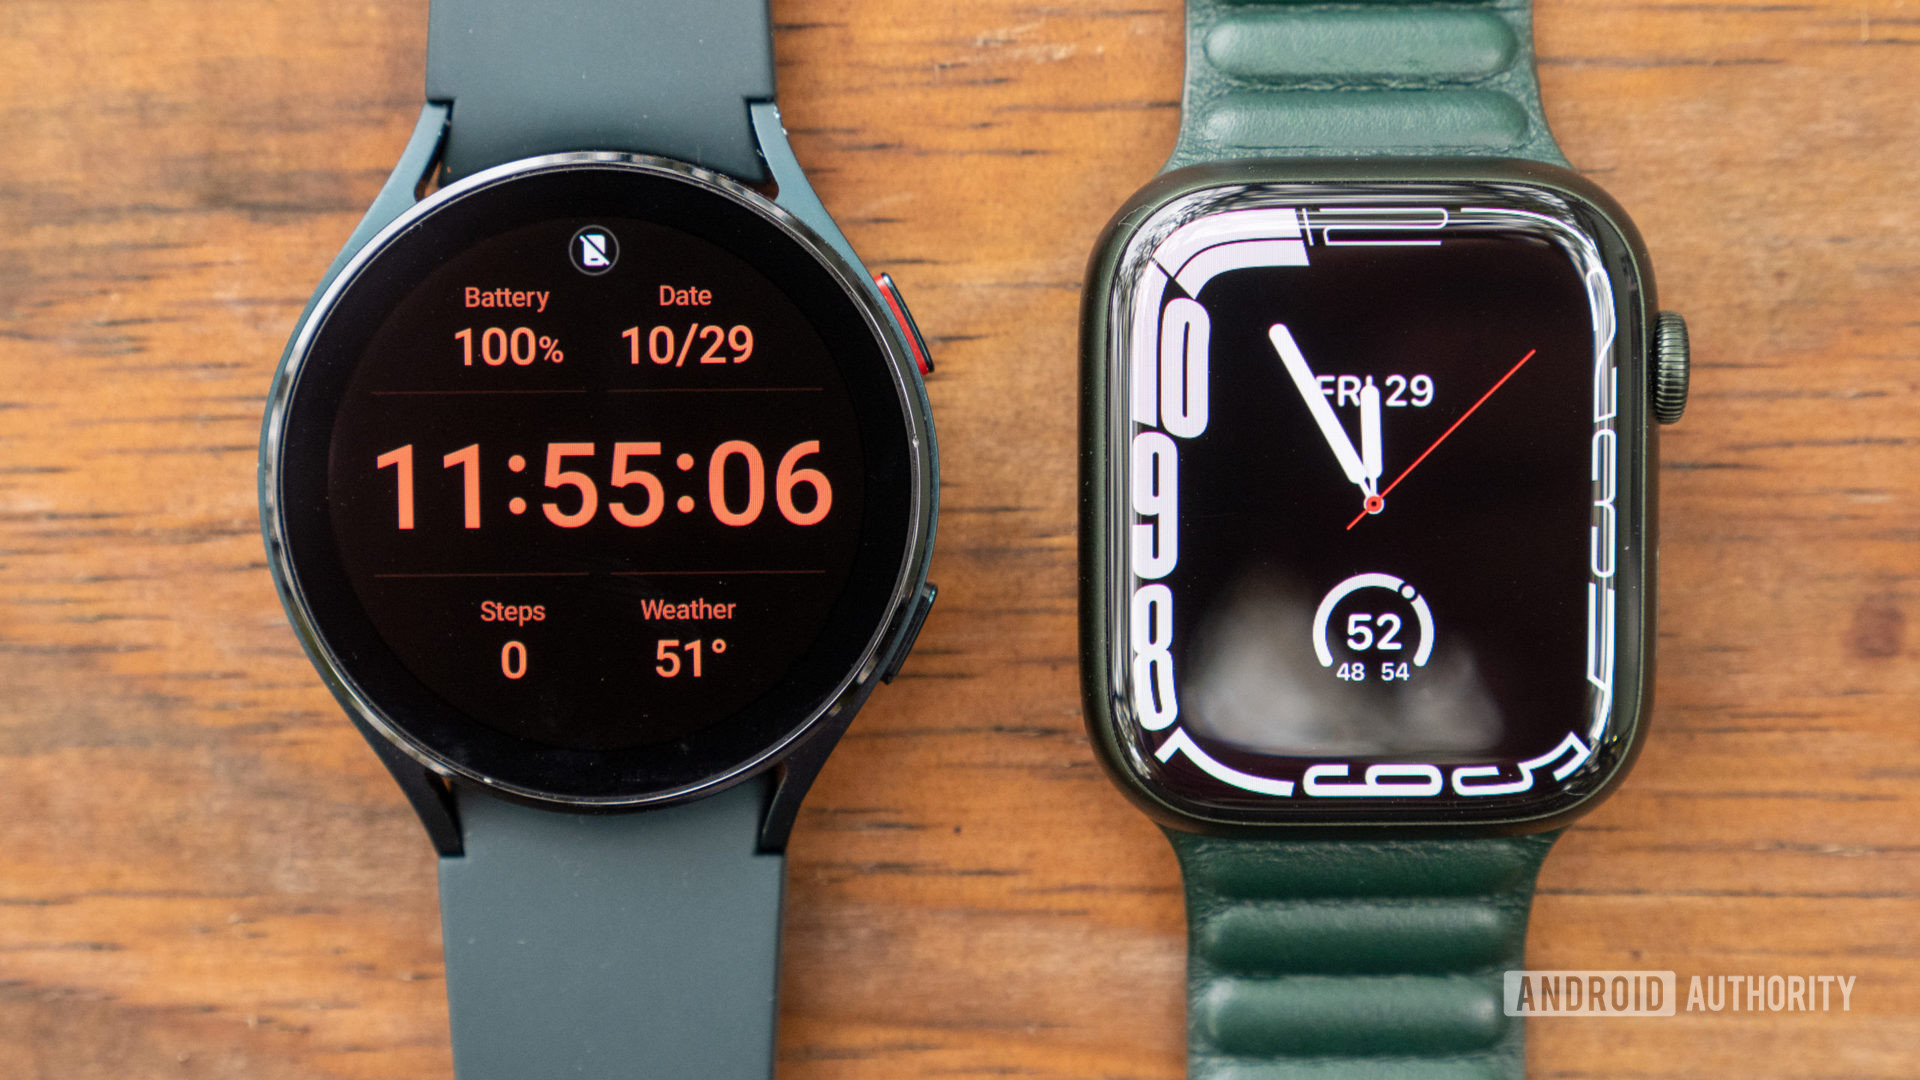 Apple Watch Series 7 vs Samsung Galaxy Watch 4 display watch face on table side by side